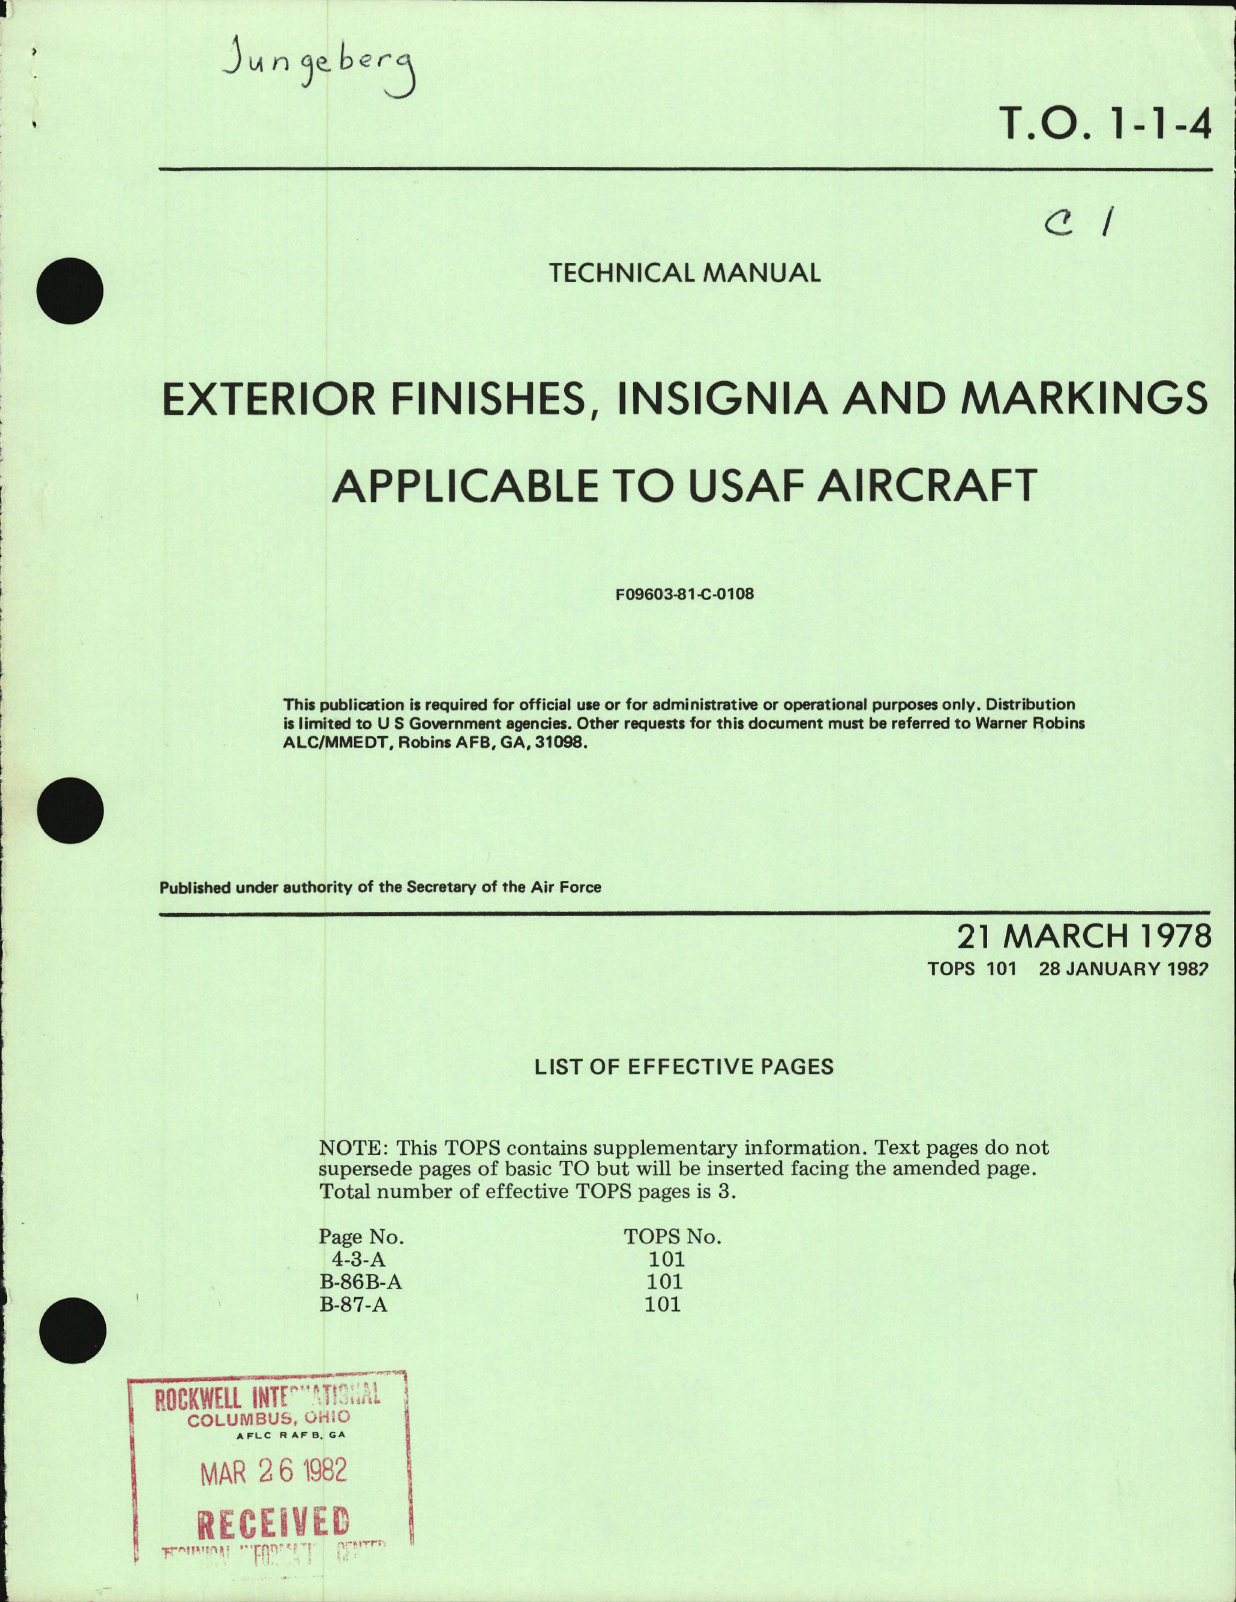 Sample page 1 from AirCorps Library document: Exterior Finishes, Insignia and Markings for USAF Aircraft - TOPS 101